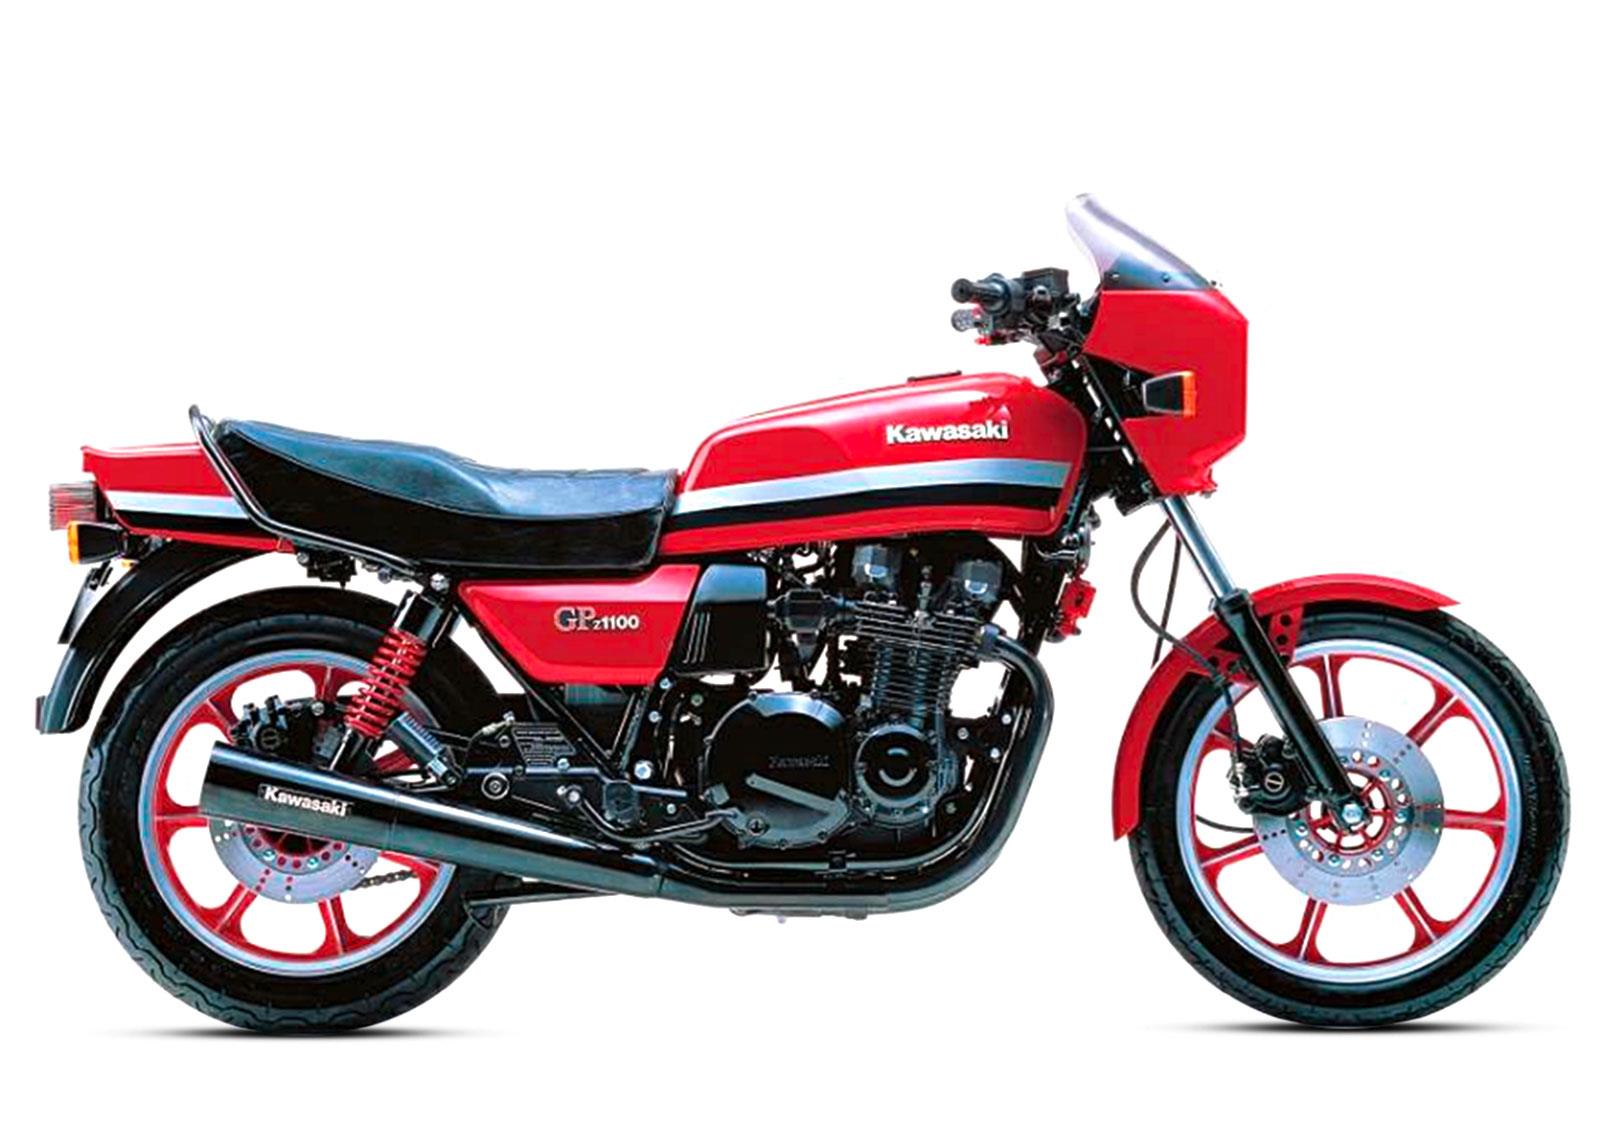 Kawasaki GPz1100: The last king of a vanished clan – superbikes MCN